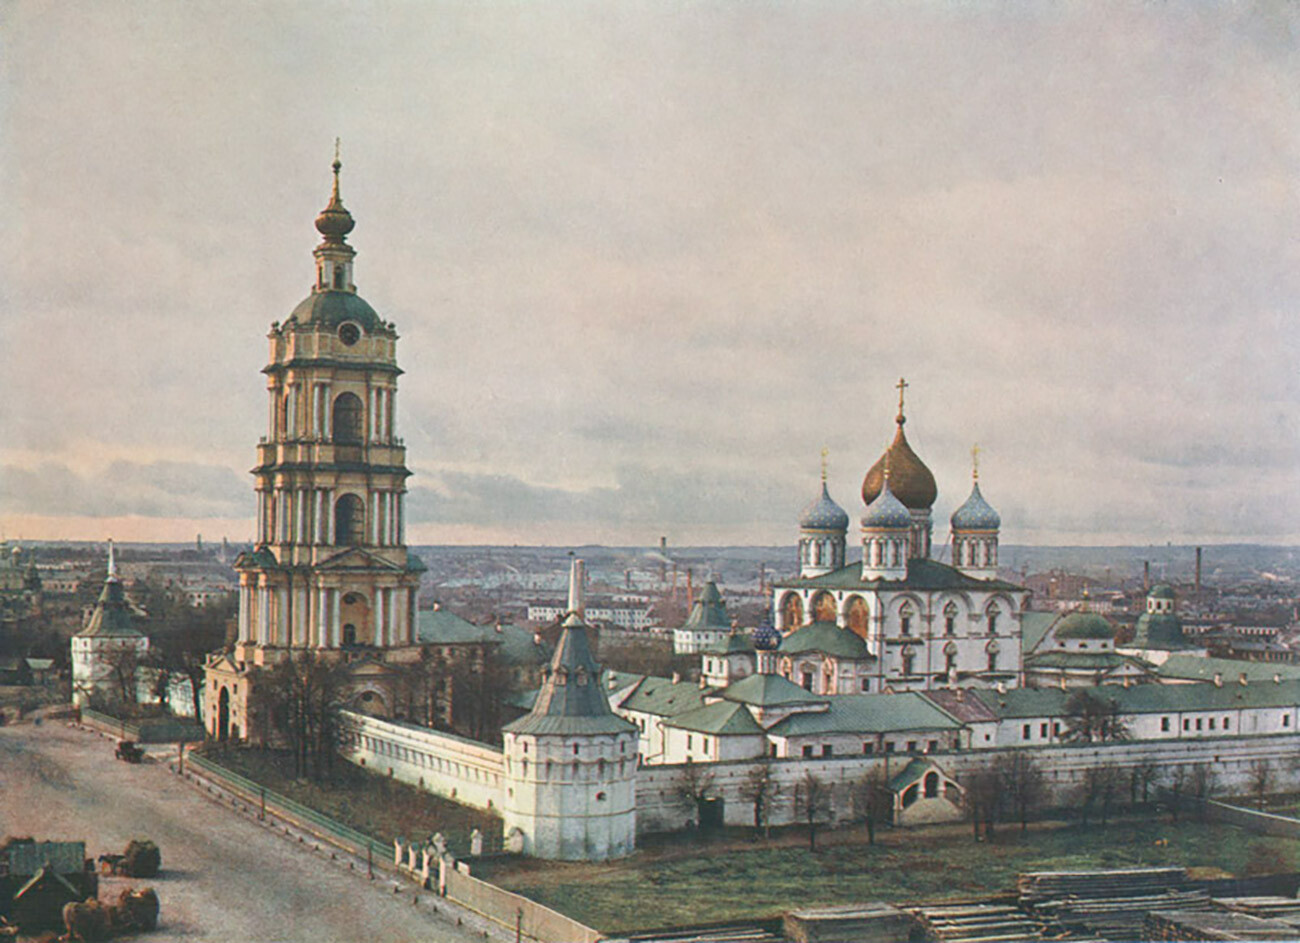 Moscow. Novospassky Monastery. From left: Southeast tower, bell tower, northeast tower, Church of St.Nicholas & east cloisters, Transfiguration Cathedral, Znamenie Church, 1912. Color print published in P.G.Vasenko, Romanov Boyars and the Enthronement of Mikhail Fedorovich (St. Petersburg, 1913).